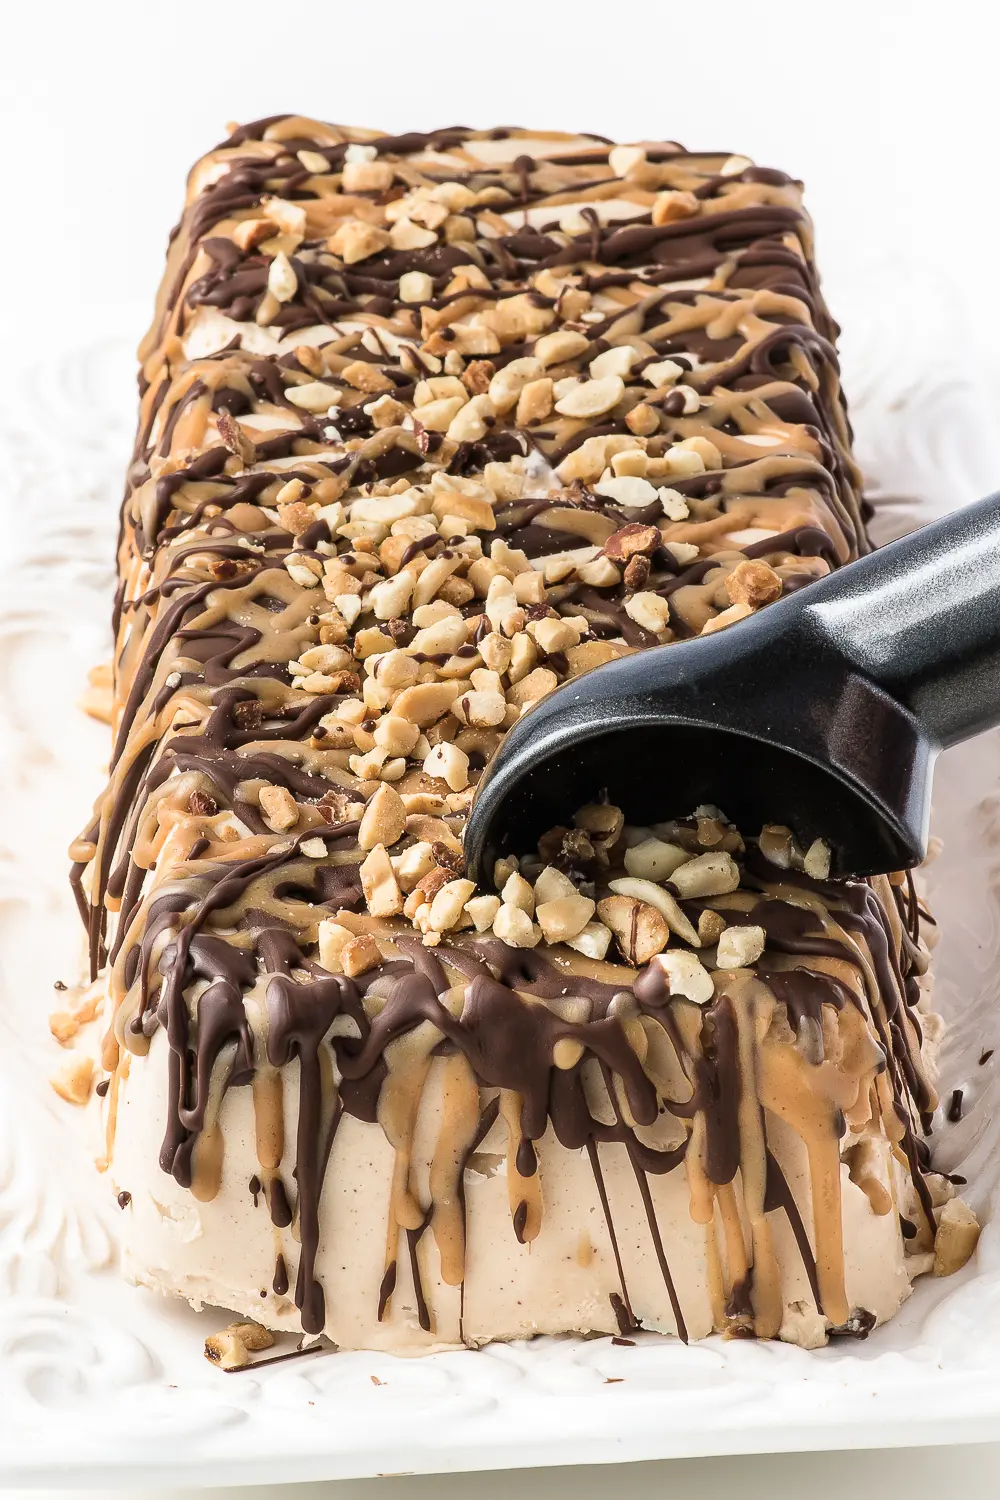 loaf shaped ice cream cake with chocolate and peanut butter drizzle